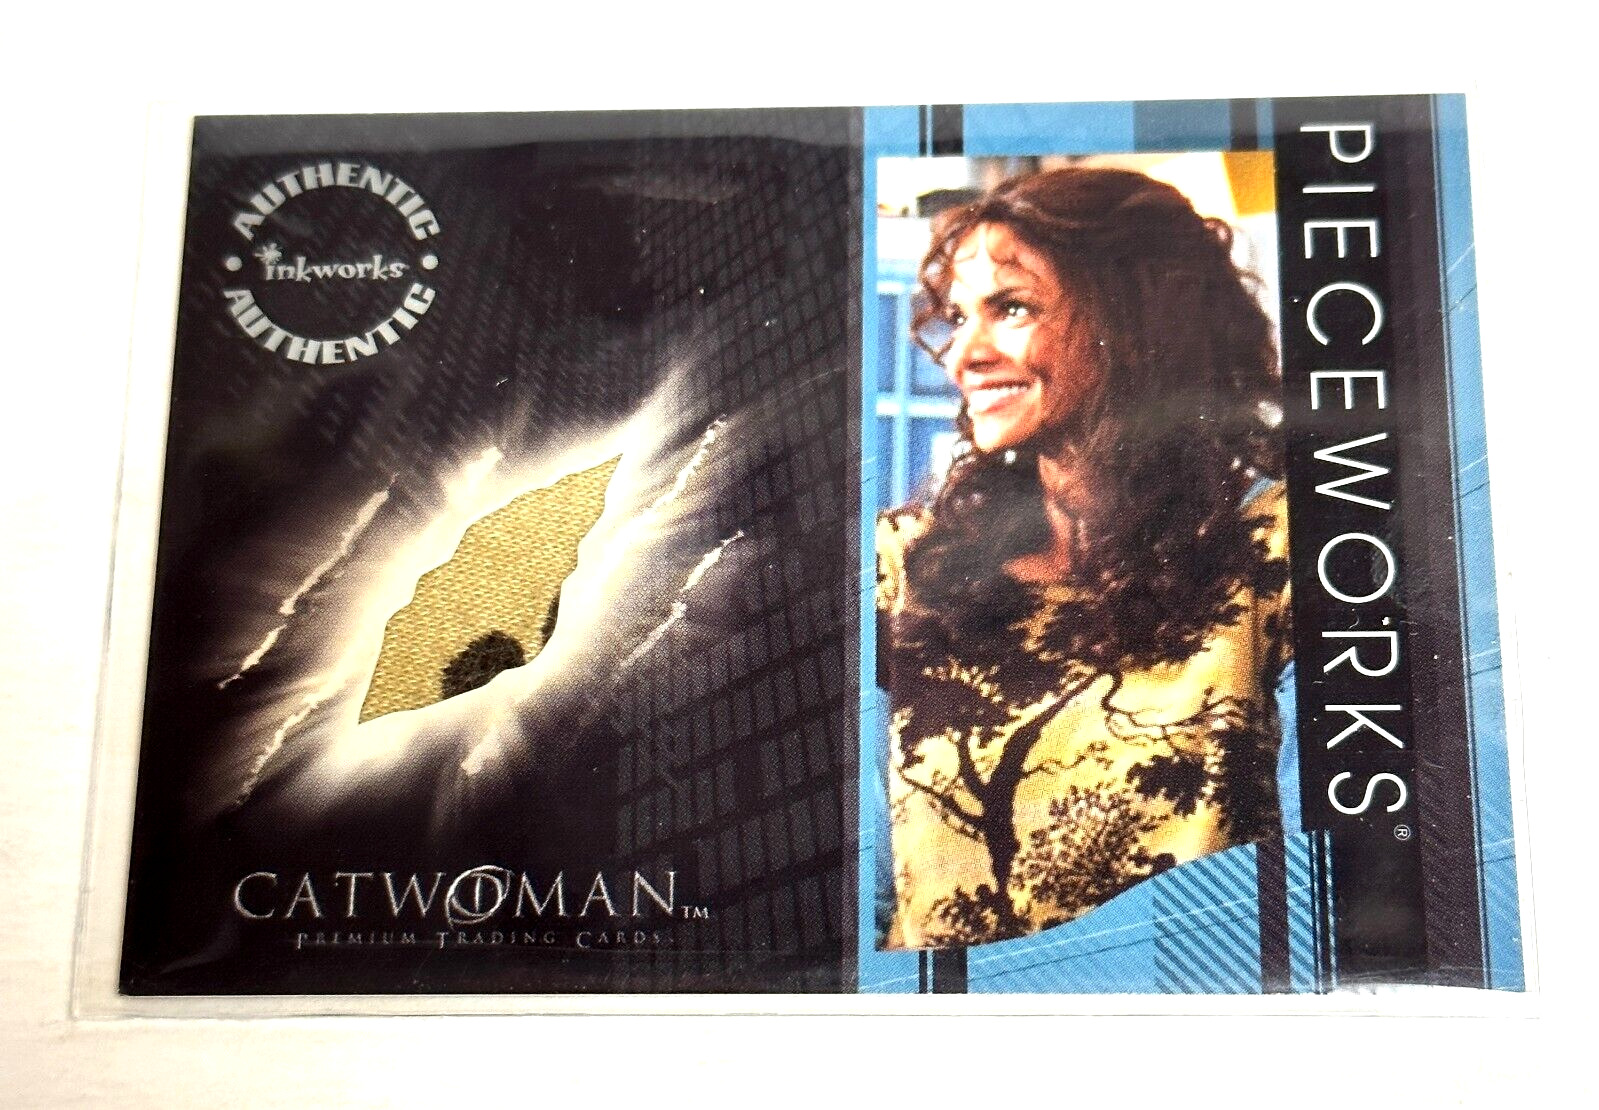 2004 Cat Woman Authentic Costume Card Featuring Top Worn by Halle Berry PW-11